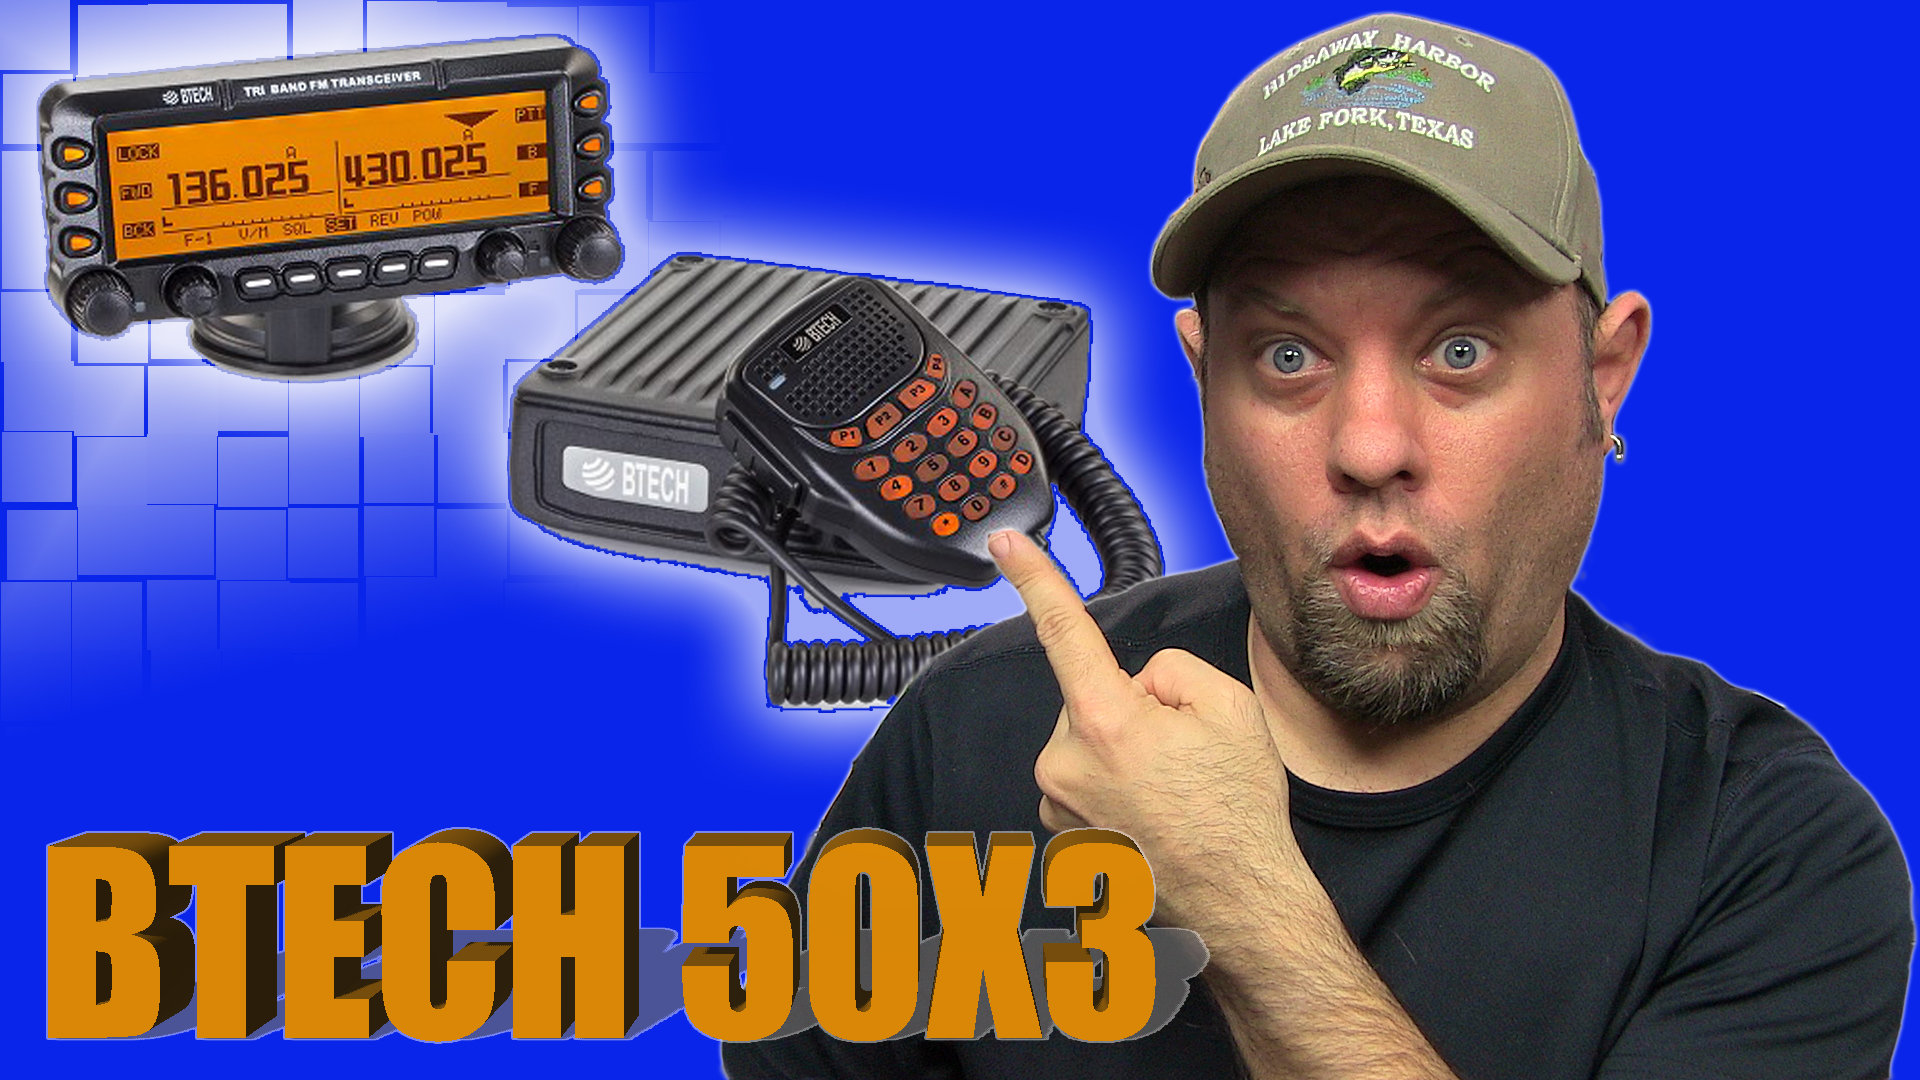 Episode 407: BaofengTech BTECH 50X3 Triband Mobile Radio Review and Power Testing